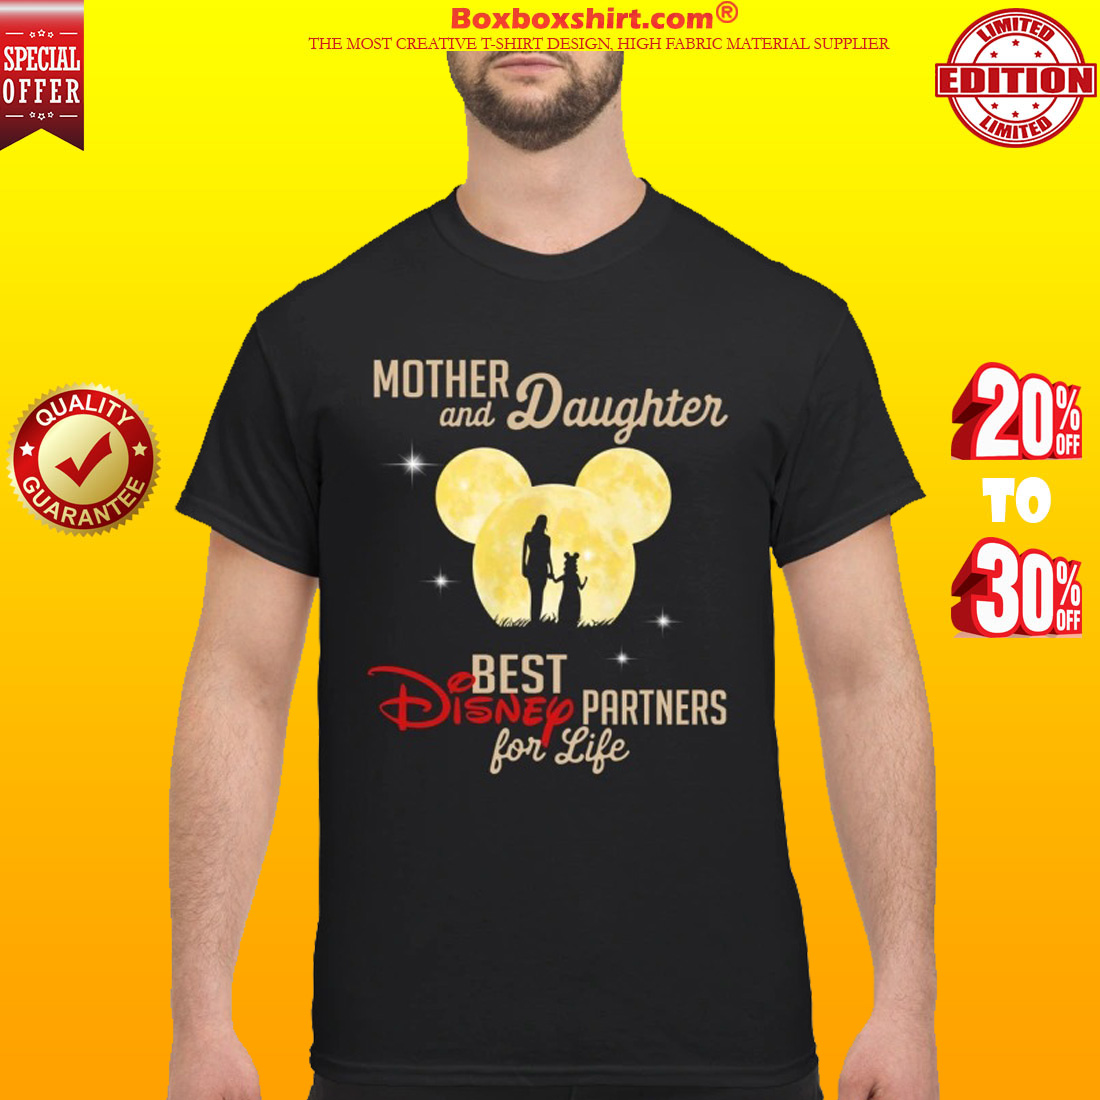 Mother and daughter best Disney partners for life classic shirt